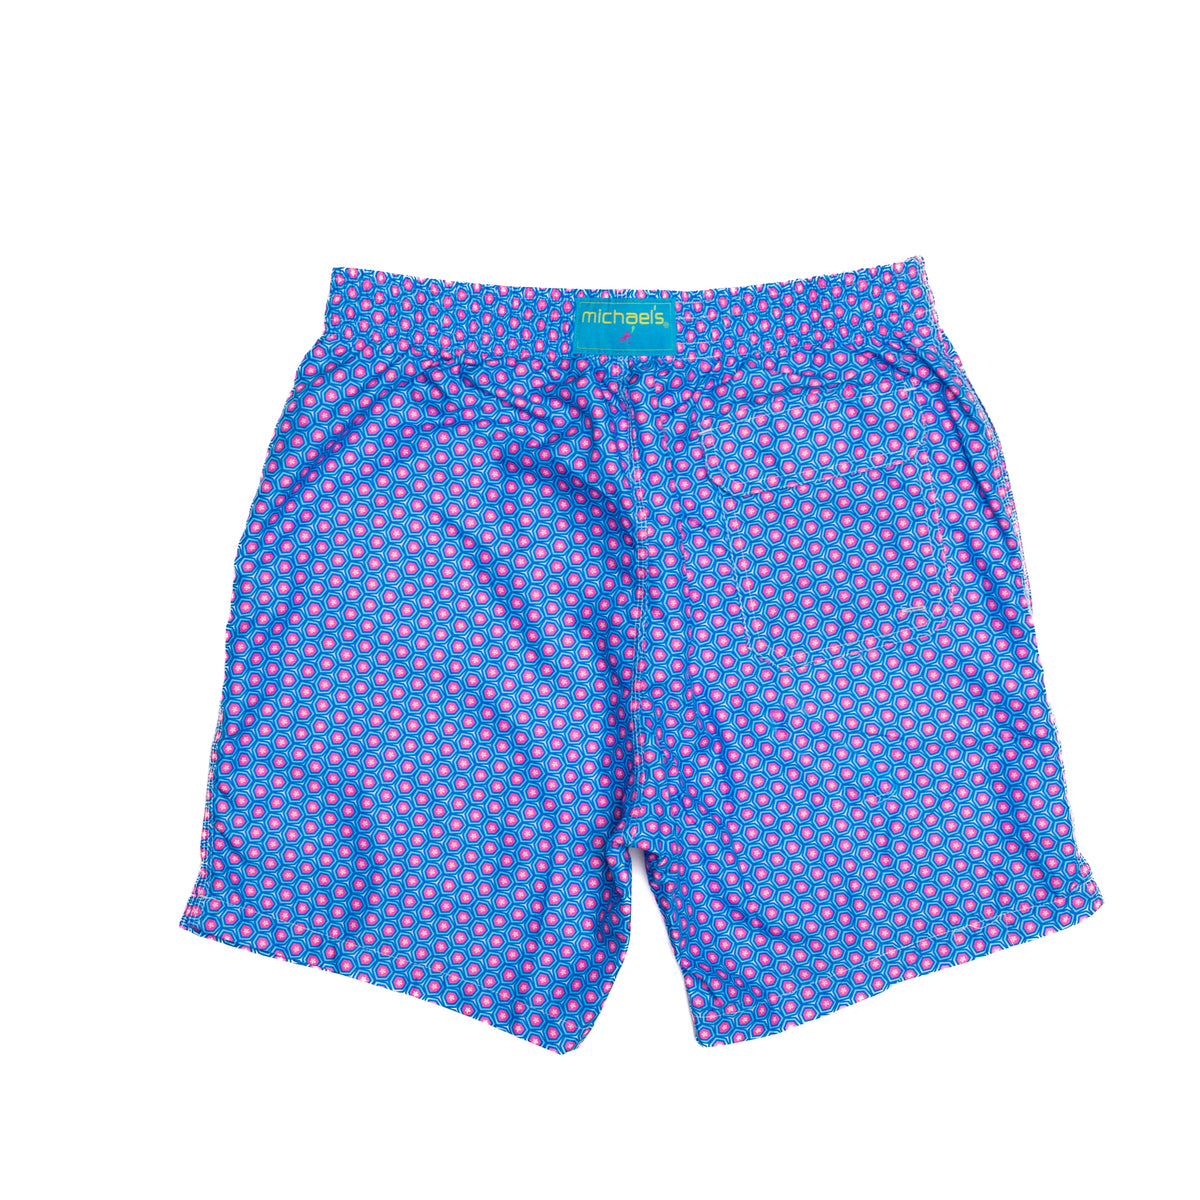 Blue/pink swim trunks with cupcake pattern for boys